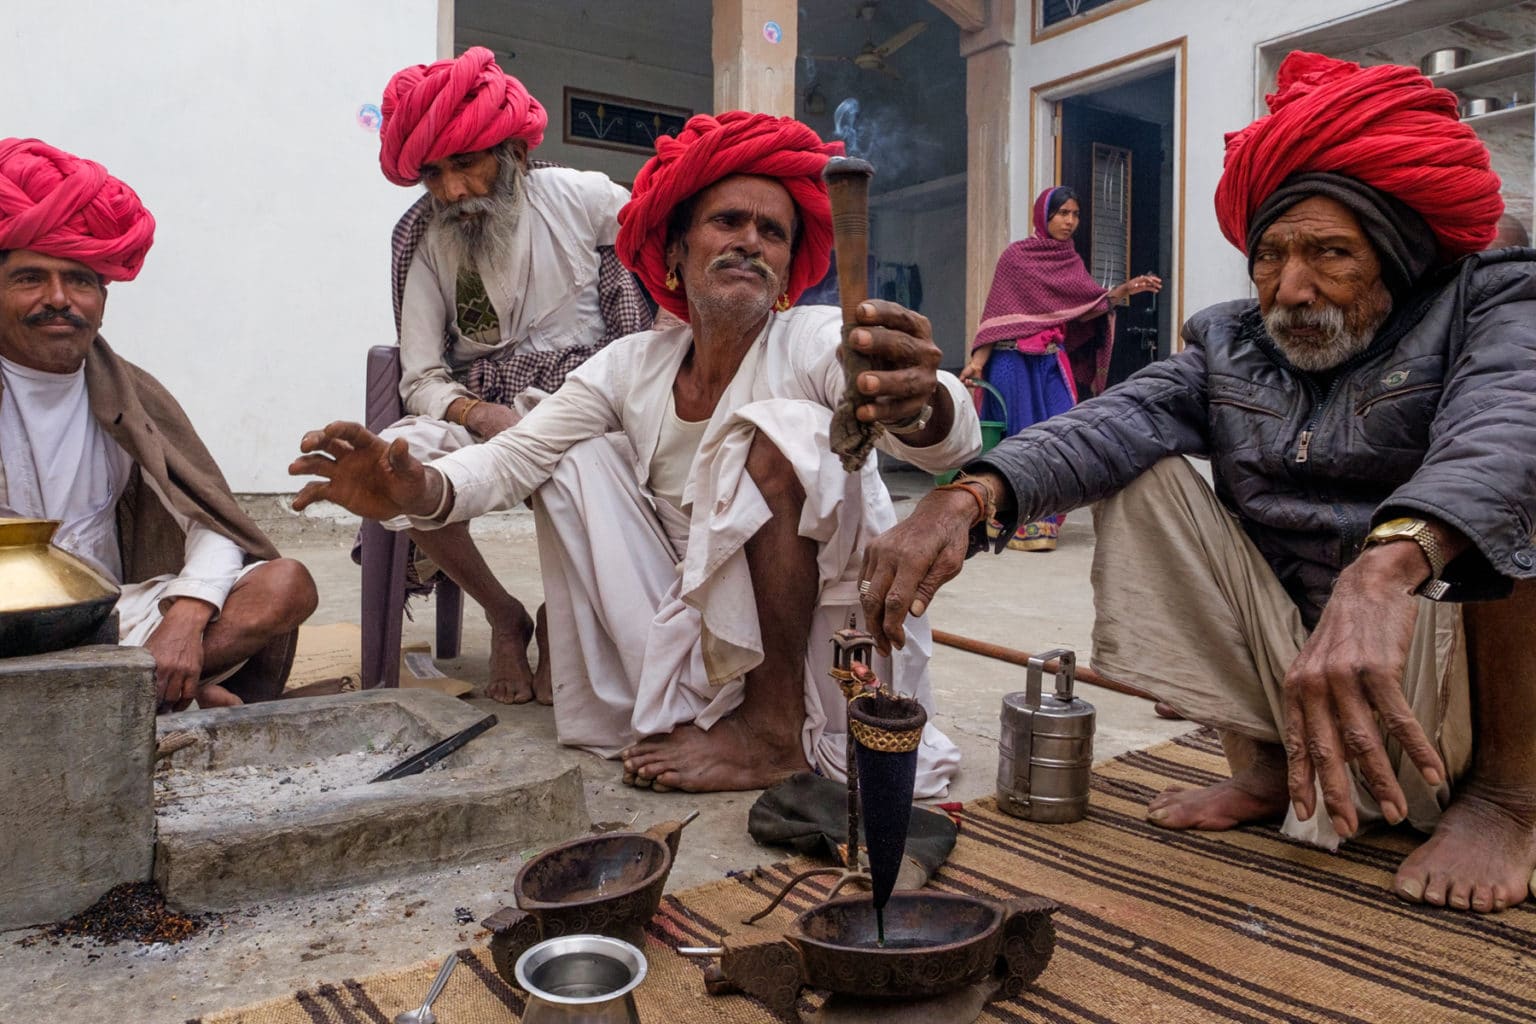 Mornings chilling with the Rabaris. That interesting looking contraption you see upfront is an opium sieve. Opium is an integral part of the culture in this part of Rajasthan, and is consumed by the Rabaris, the Bishnoi's, and back in the day even by the Rajput royals. Whilst it is often consumed on celebratory occasions, it is widely believed in these parts, that consumed in small doses, Opium aids in sleep, appetite and general well being! 
And yes, we did try some for ourselves! ;)